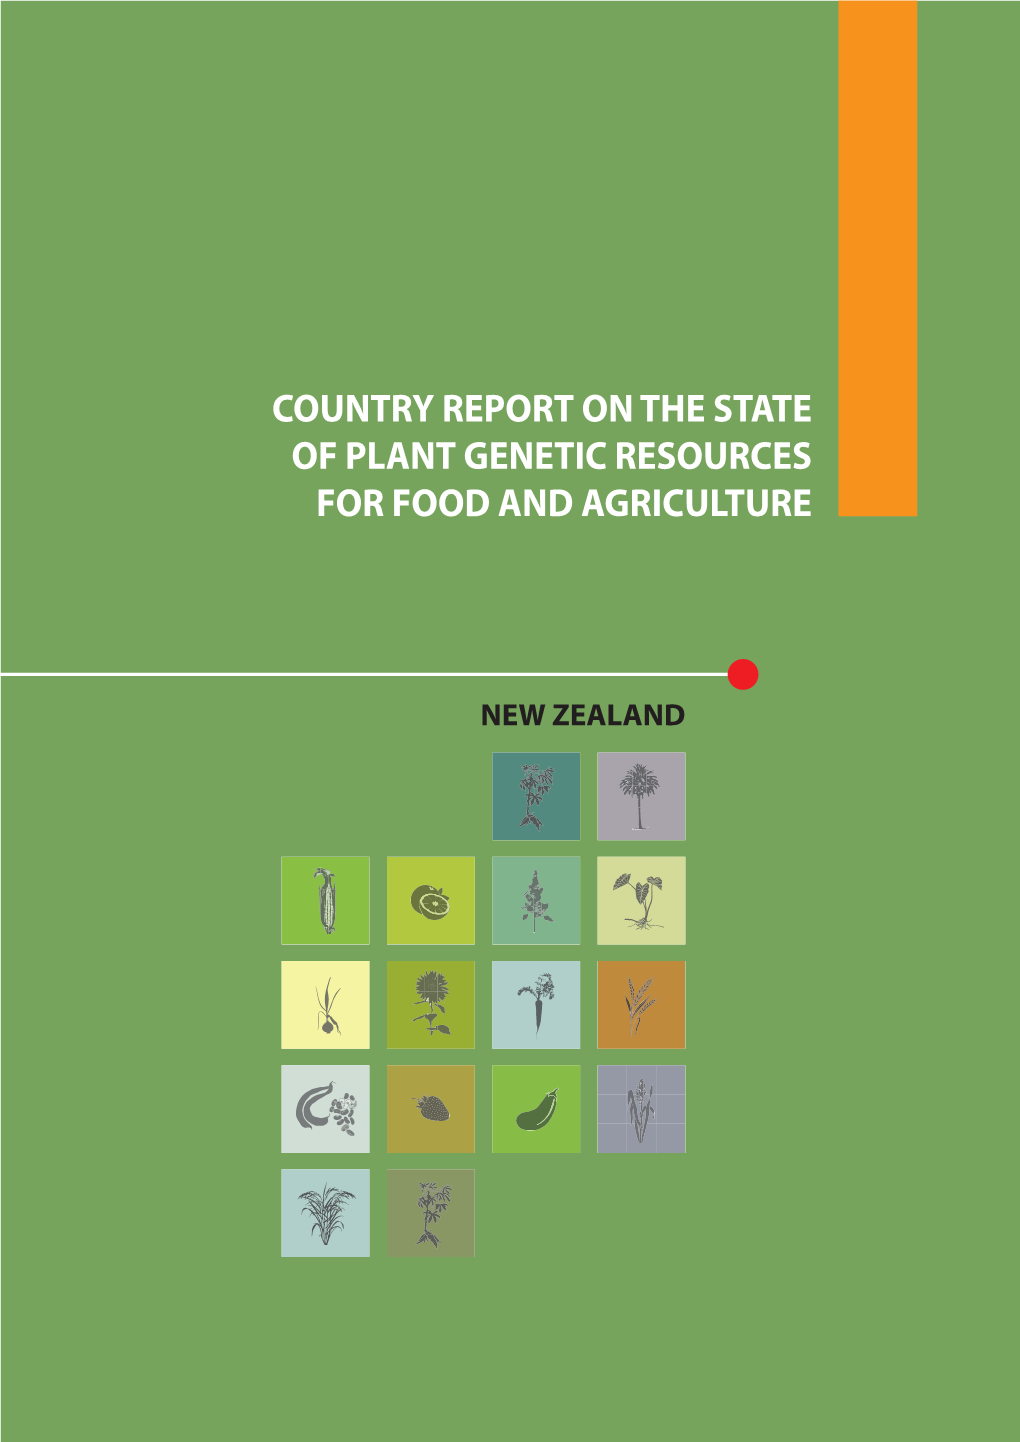 New Zealand New Zealand: Country Report for the Commission on Plant Genetic Resources for Food and Agriculture